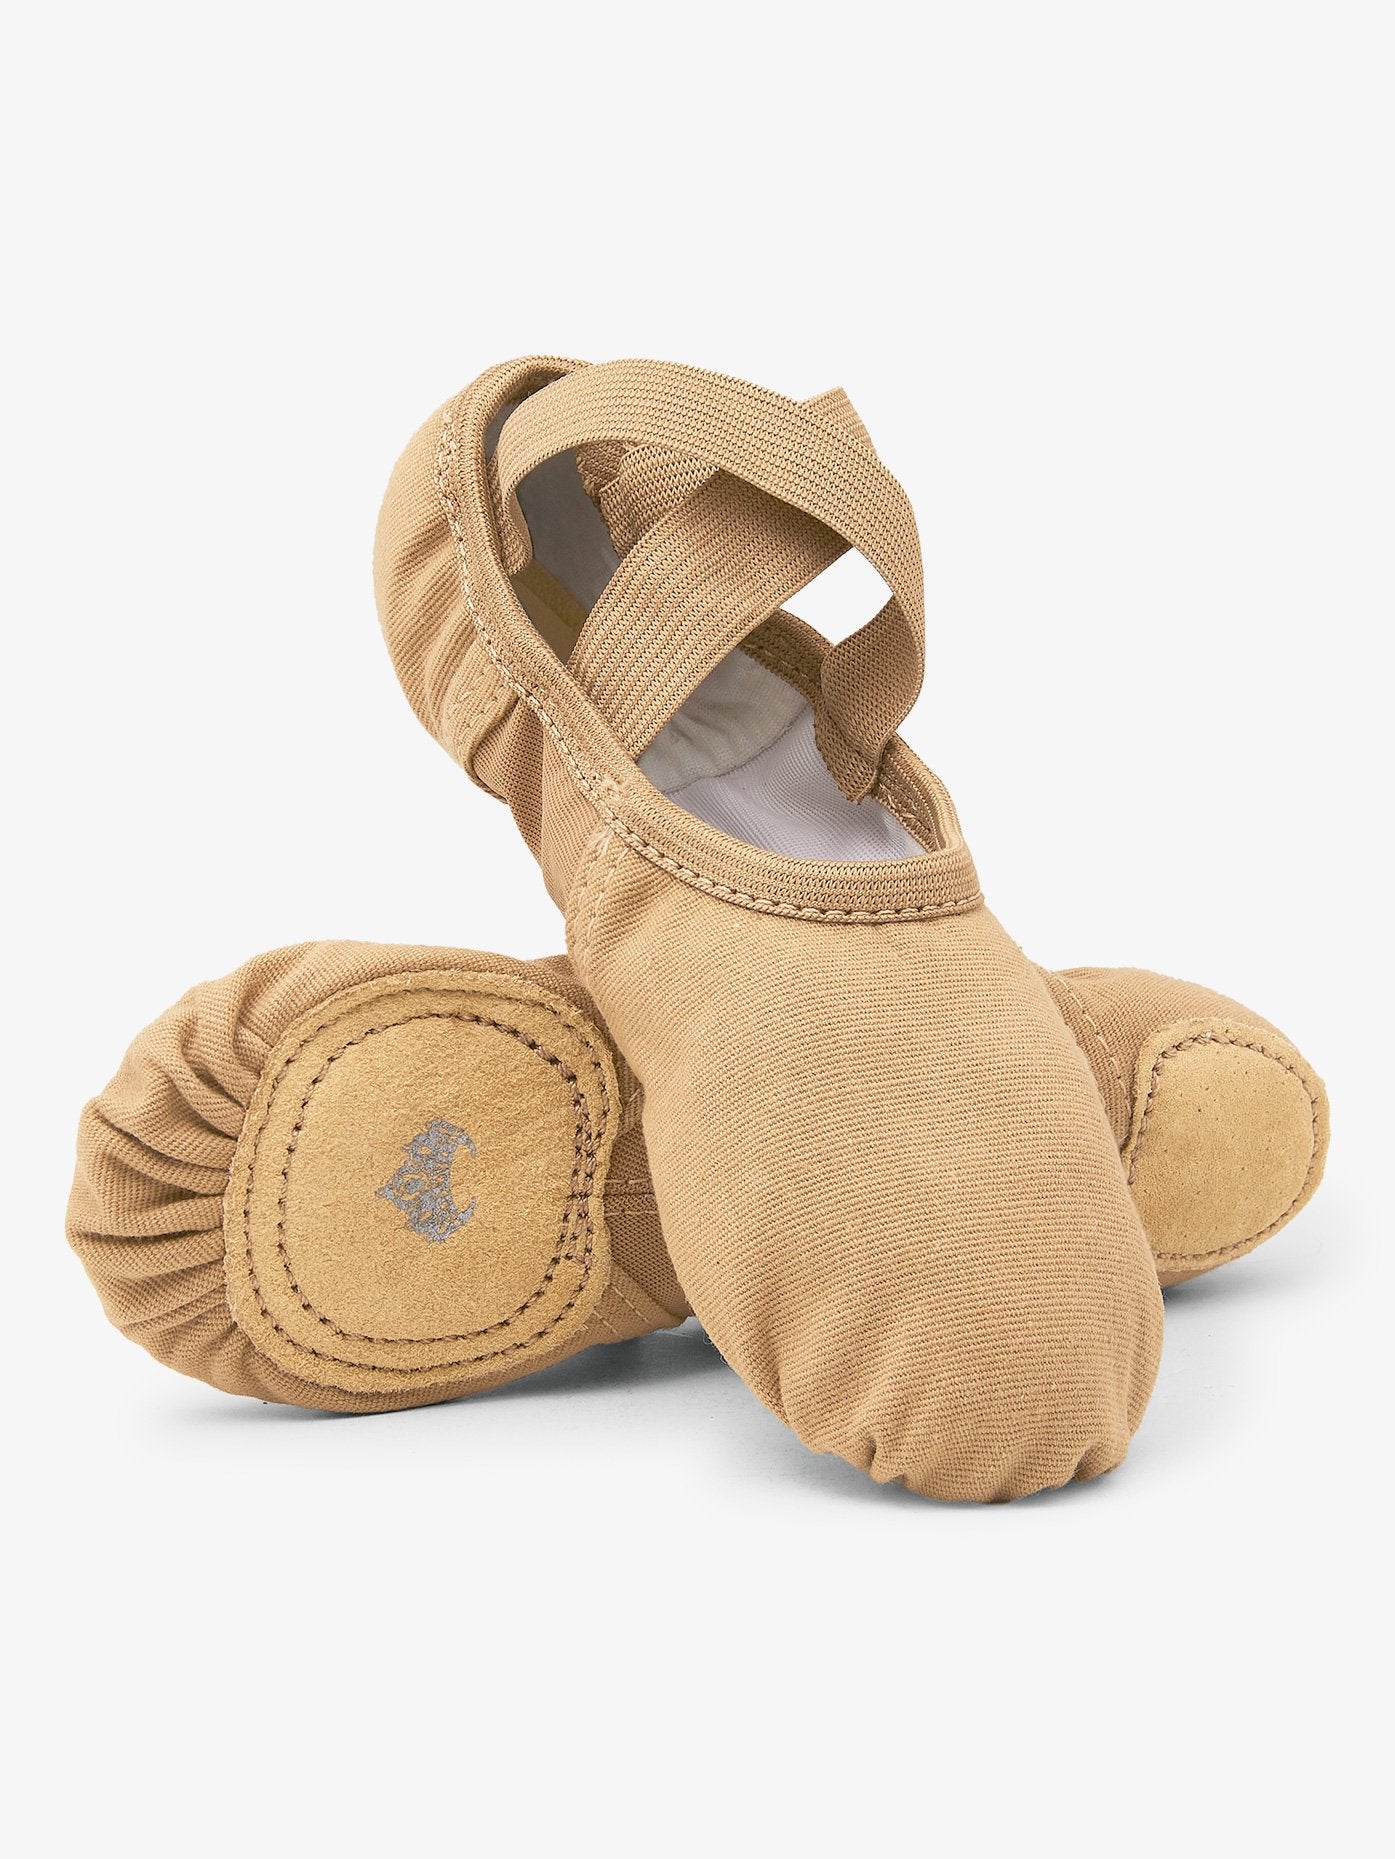 Women's canvas tan ballet shoes with nylon spandex insert and split sole for optimal flexibility and comfort